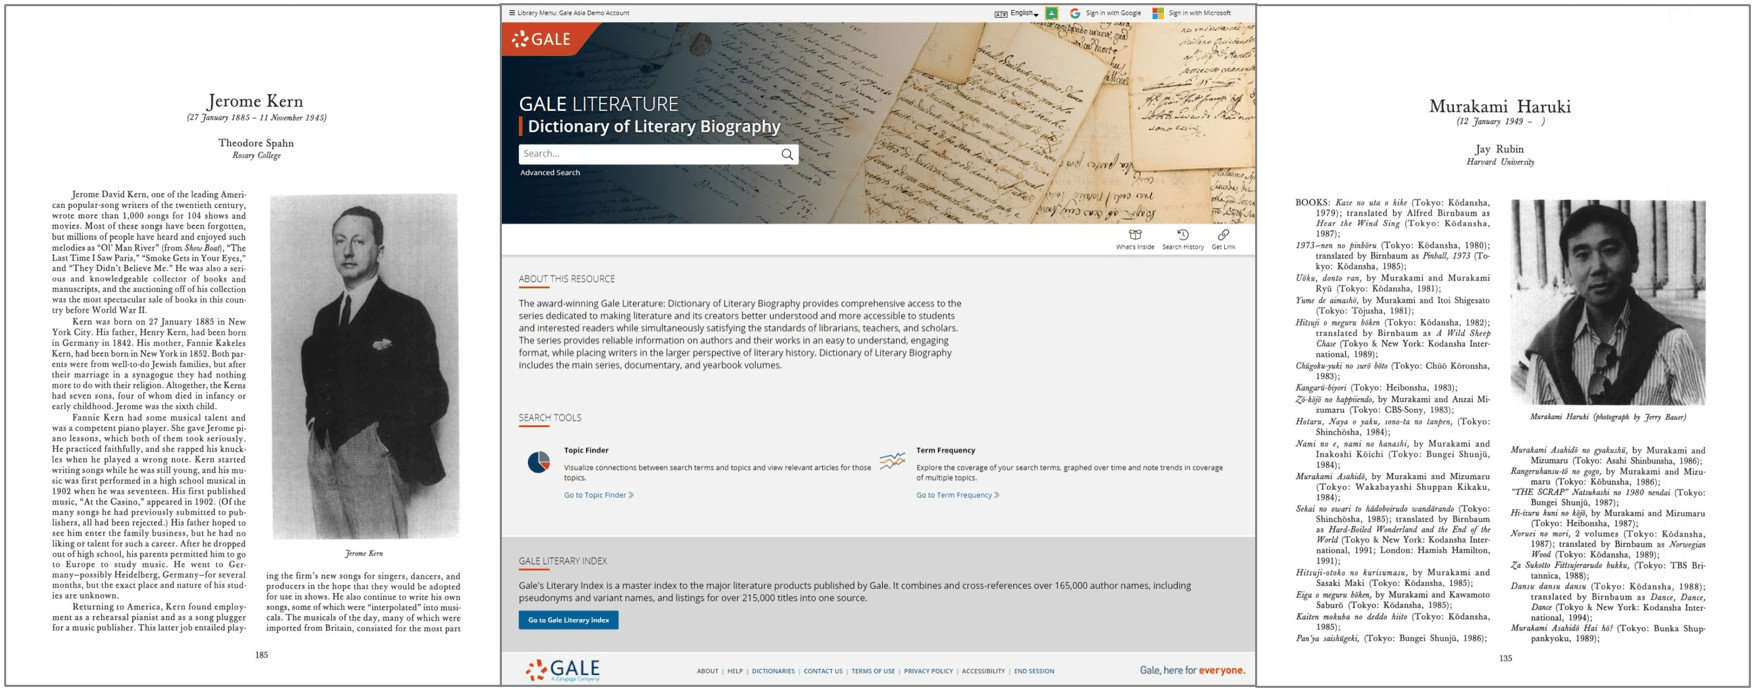 Examples from Dictionary of Literary Biography, and online product interface